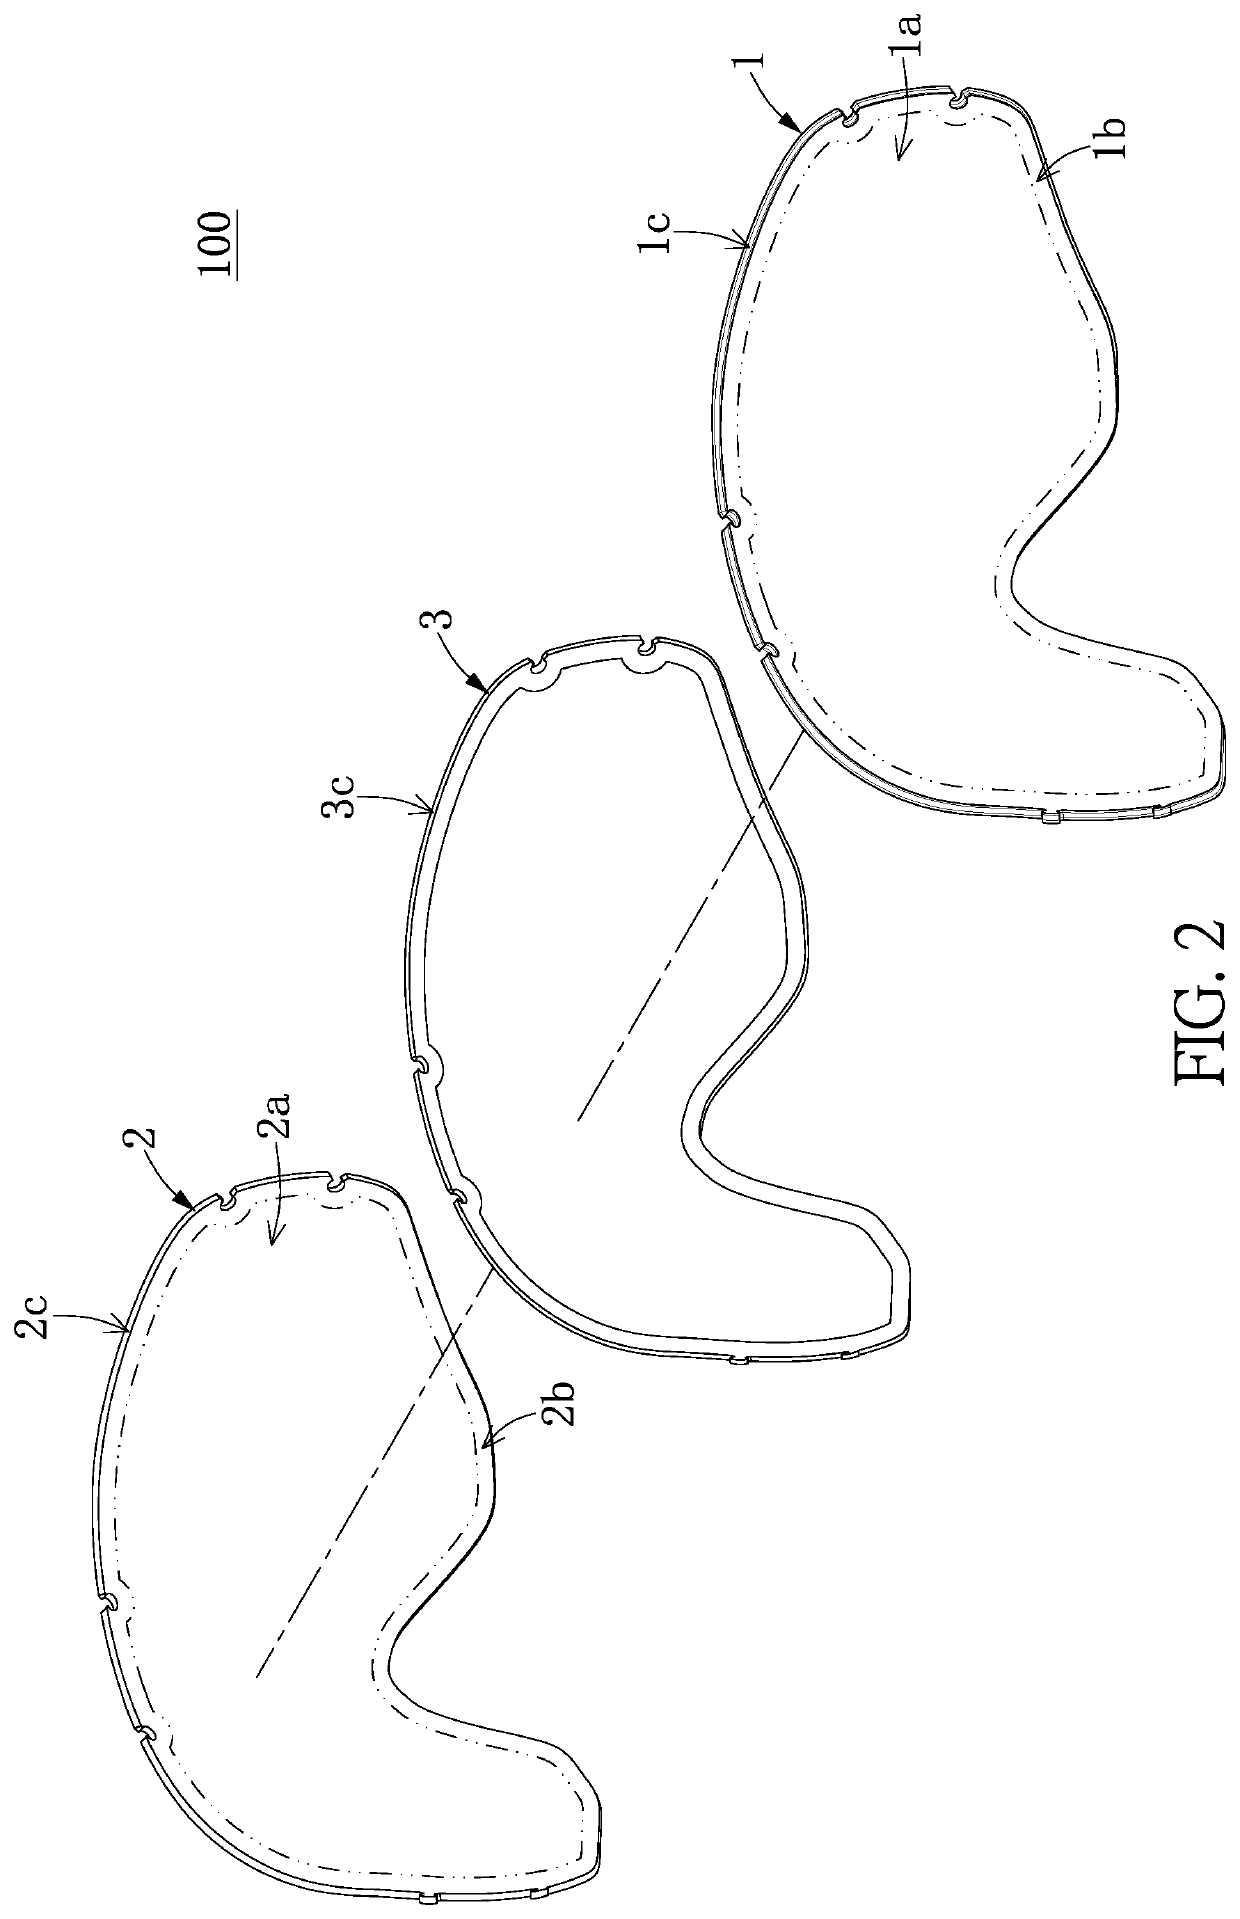 Snow goggle device and composite lens